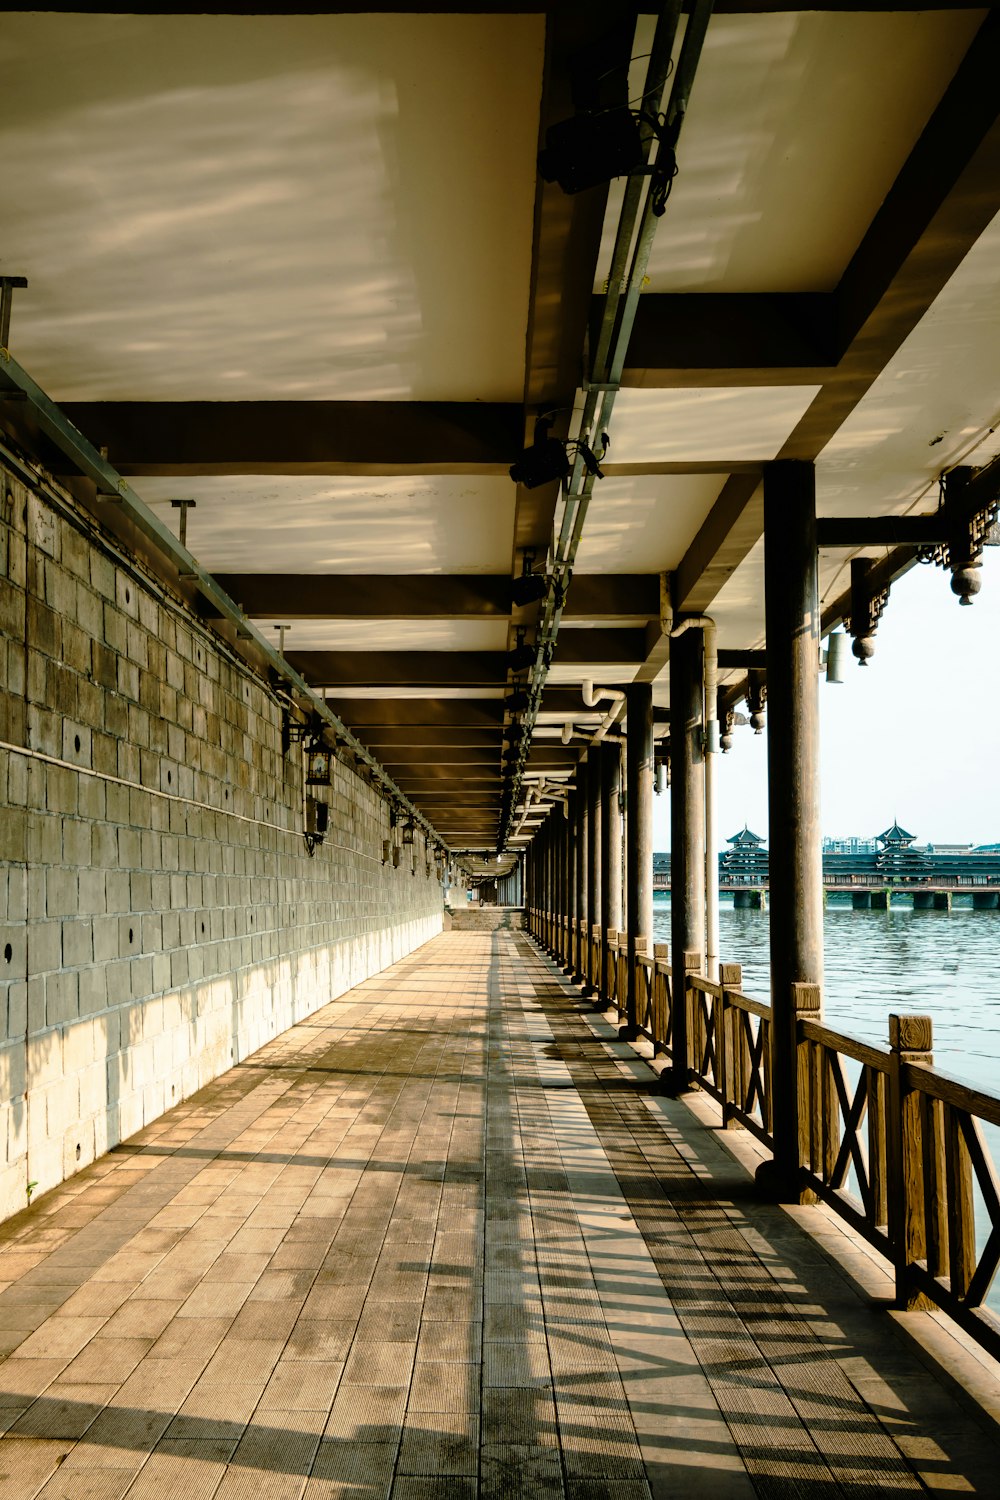 a long wooden walkway next to a body of water